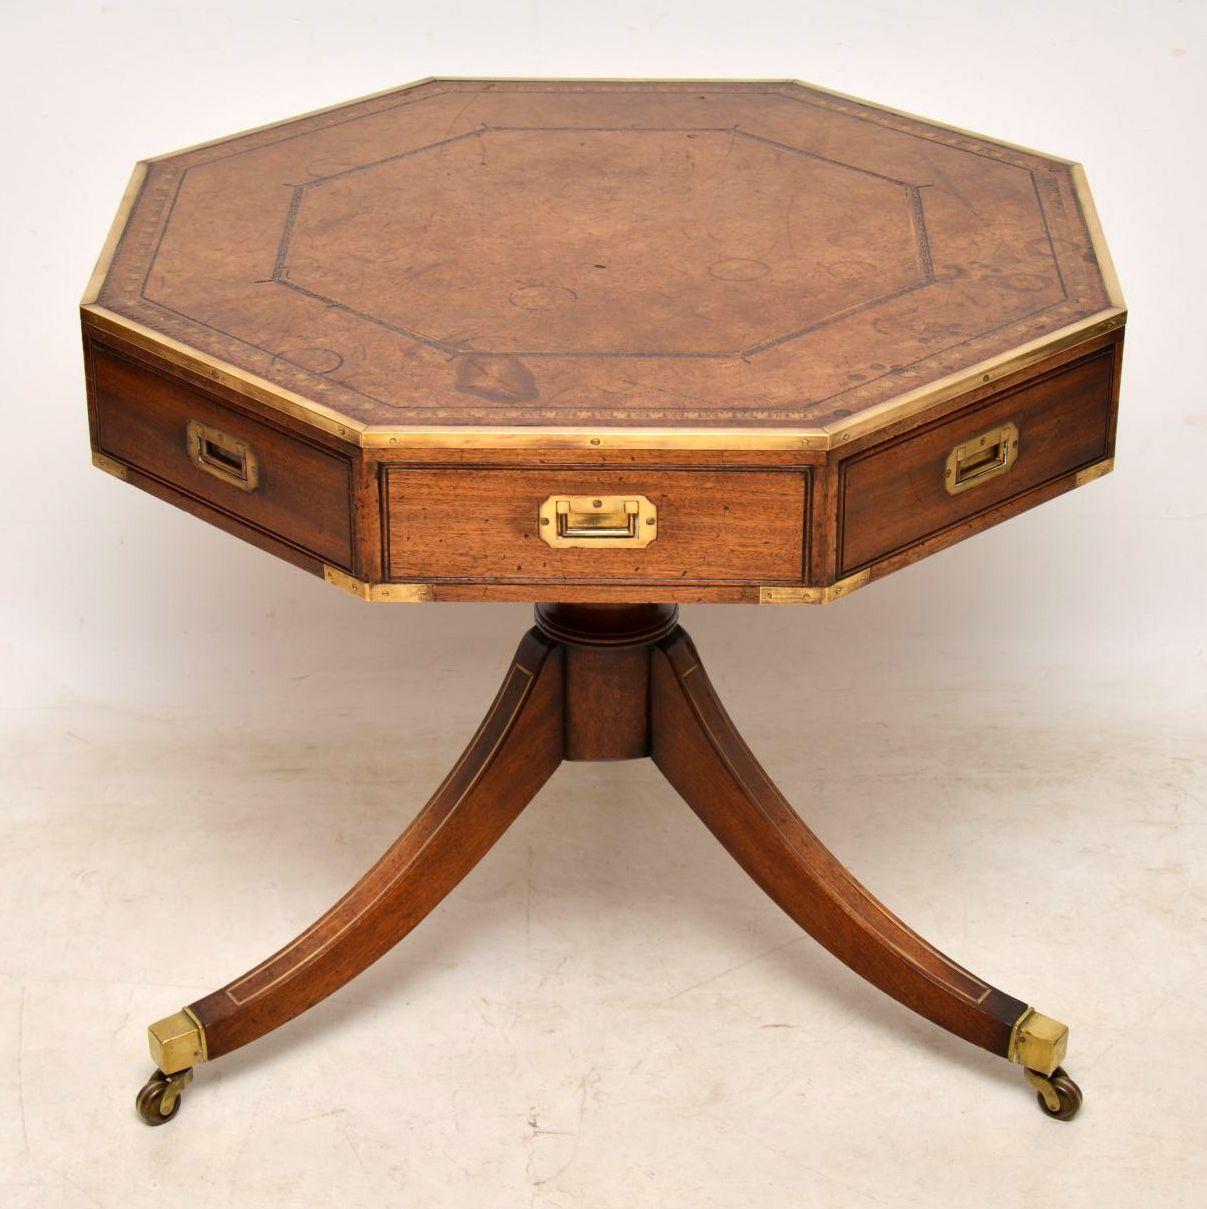 Antique mahogany Campaign style drum table with an octagonal top inset with the original tooled leather which has aged really well and shows plenty of character. The top has a brass top rim, inset brass military handles on the drawers and more brass